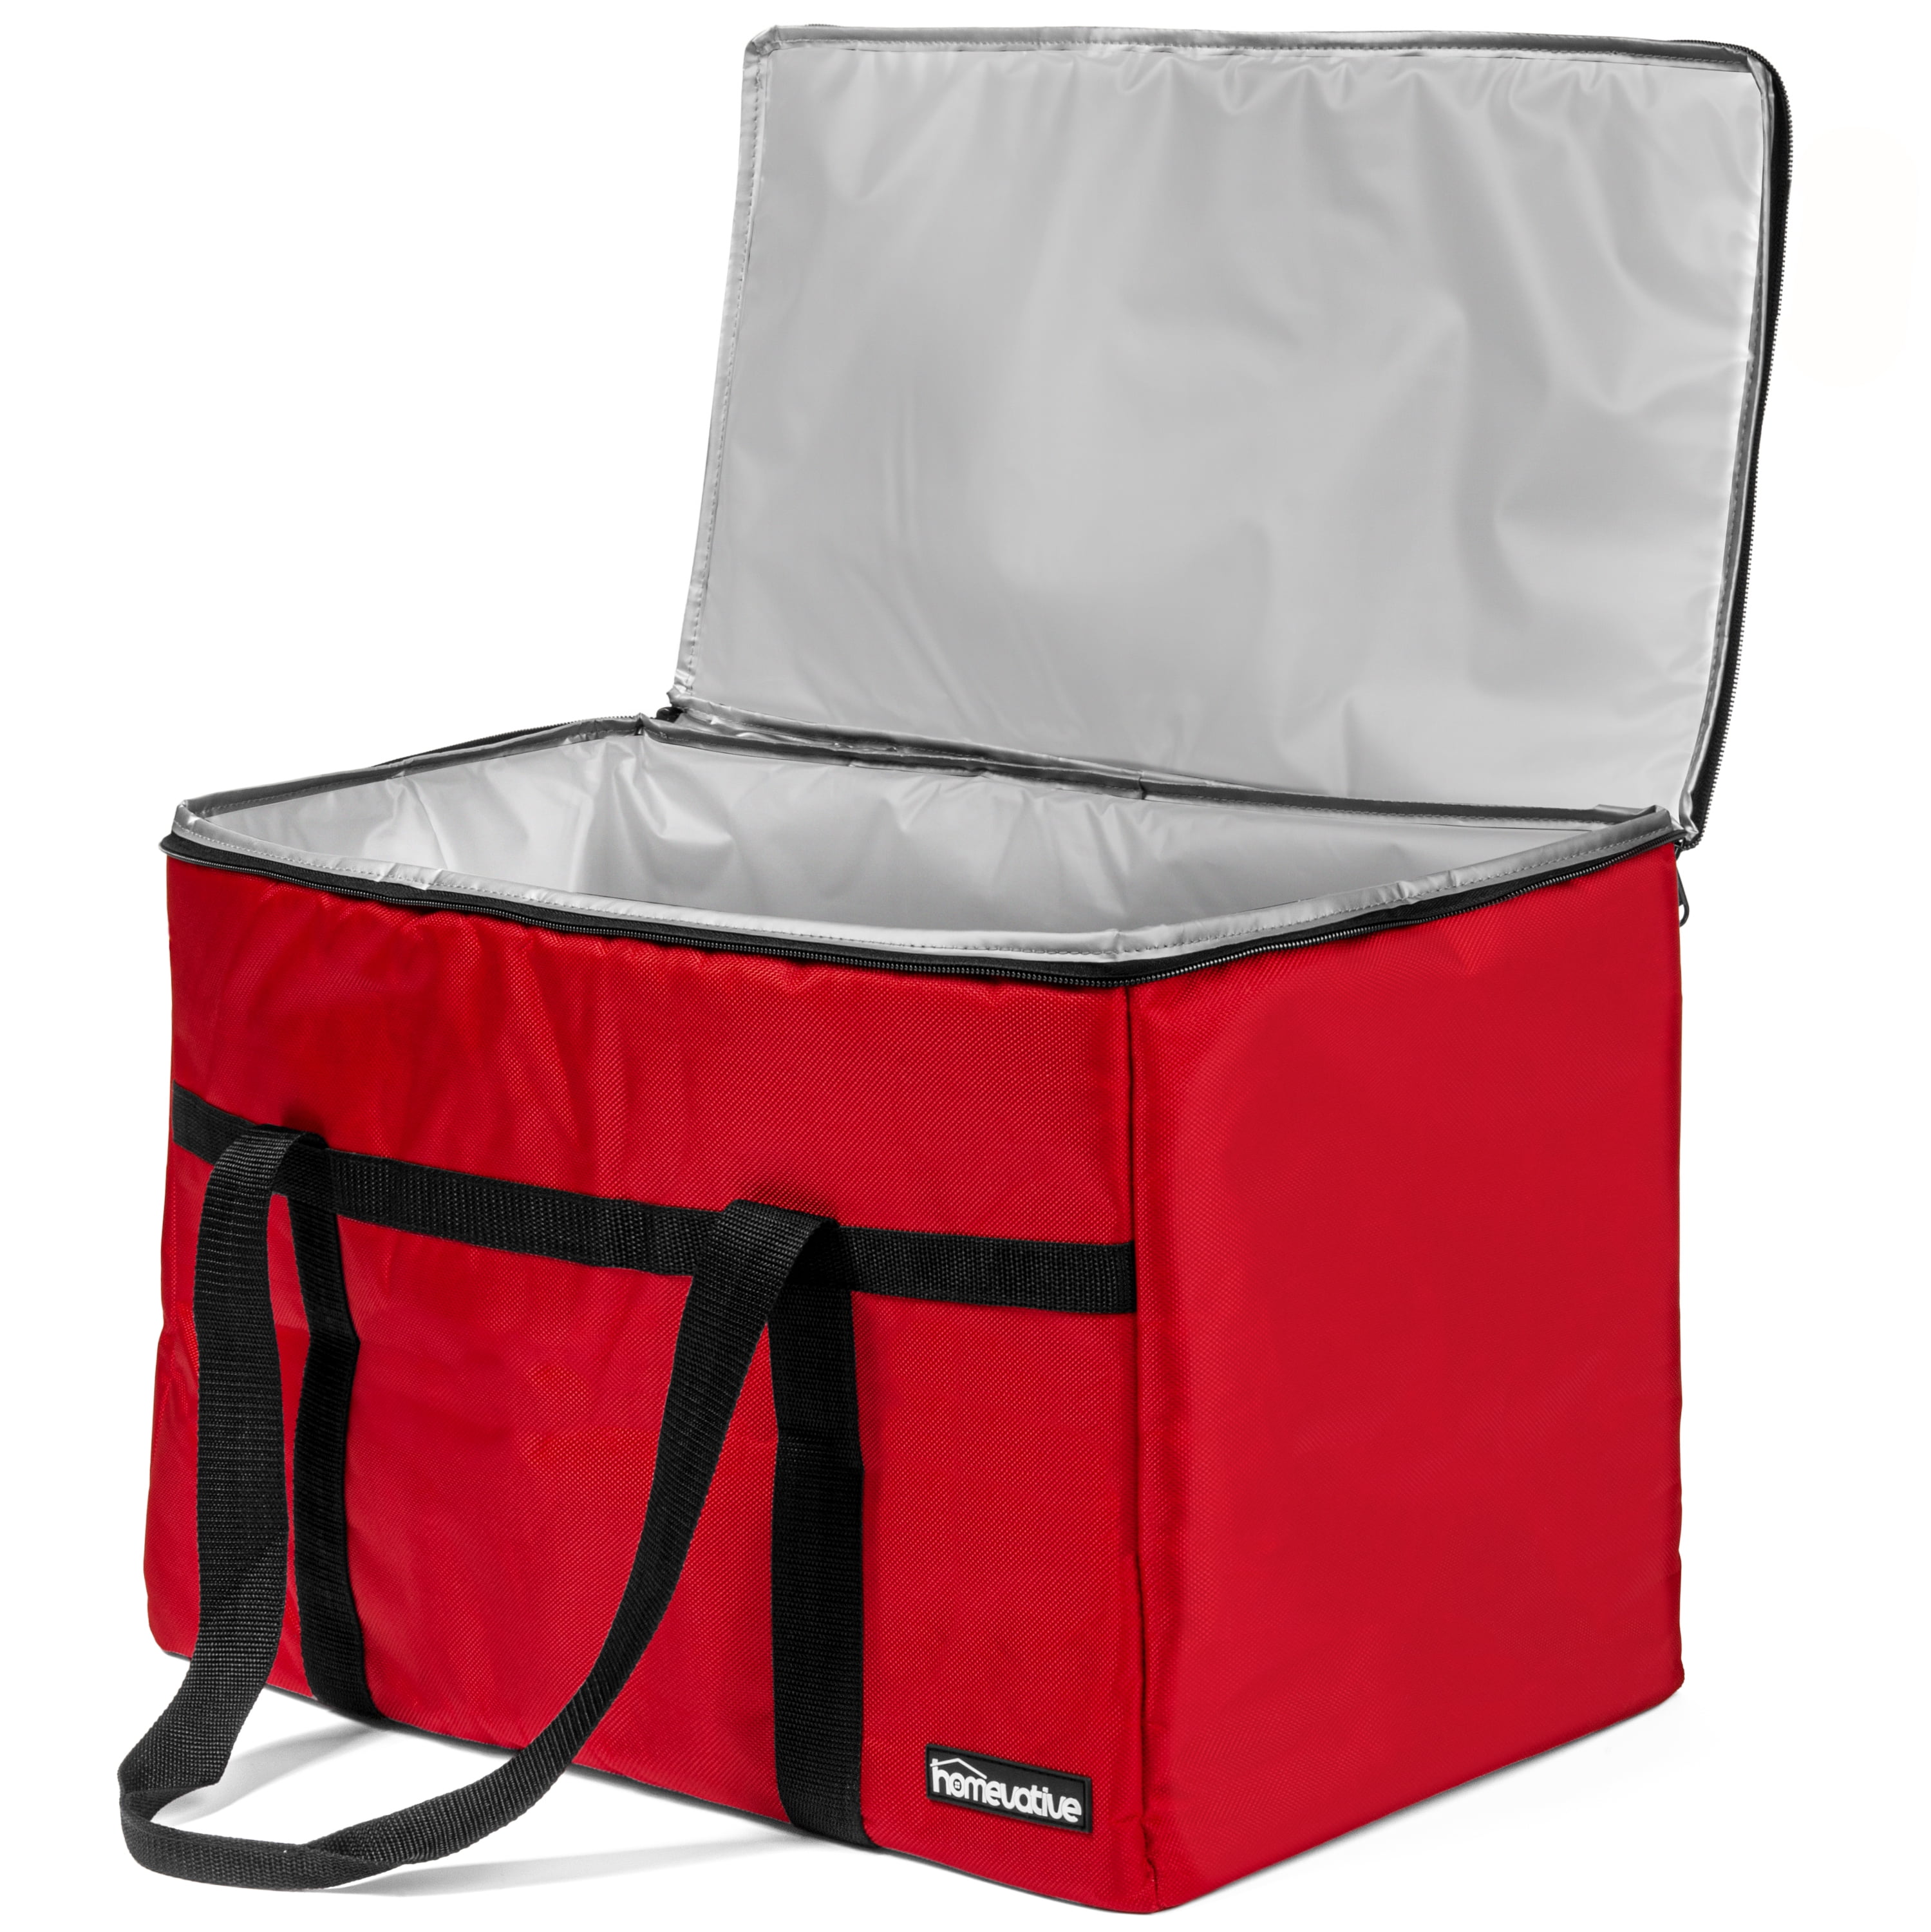 INSULATED TAKEWAY/RESTAURANT PIZZA DELIVERY BAG XLARGE HEAVY DUTY 53x50x13 cm